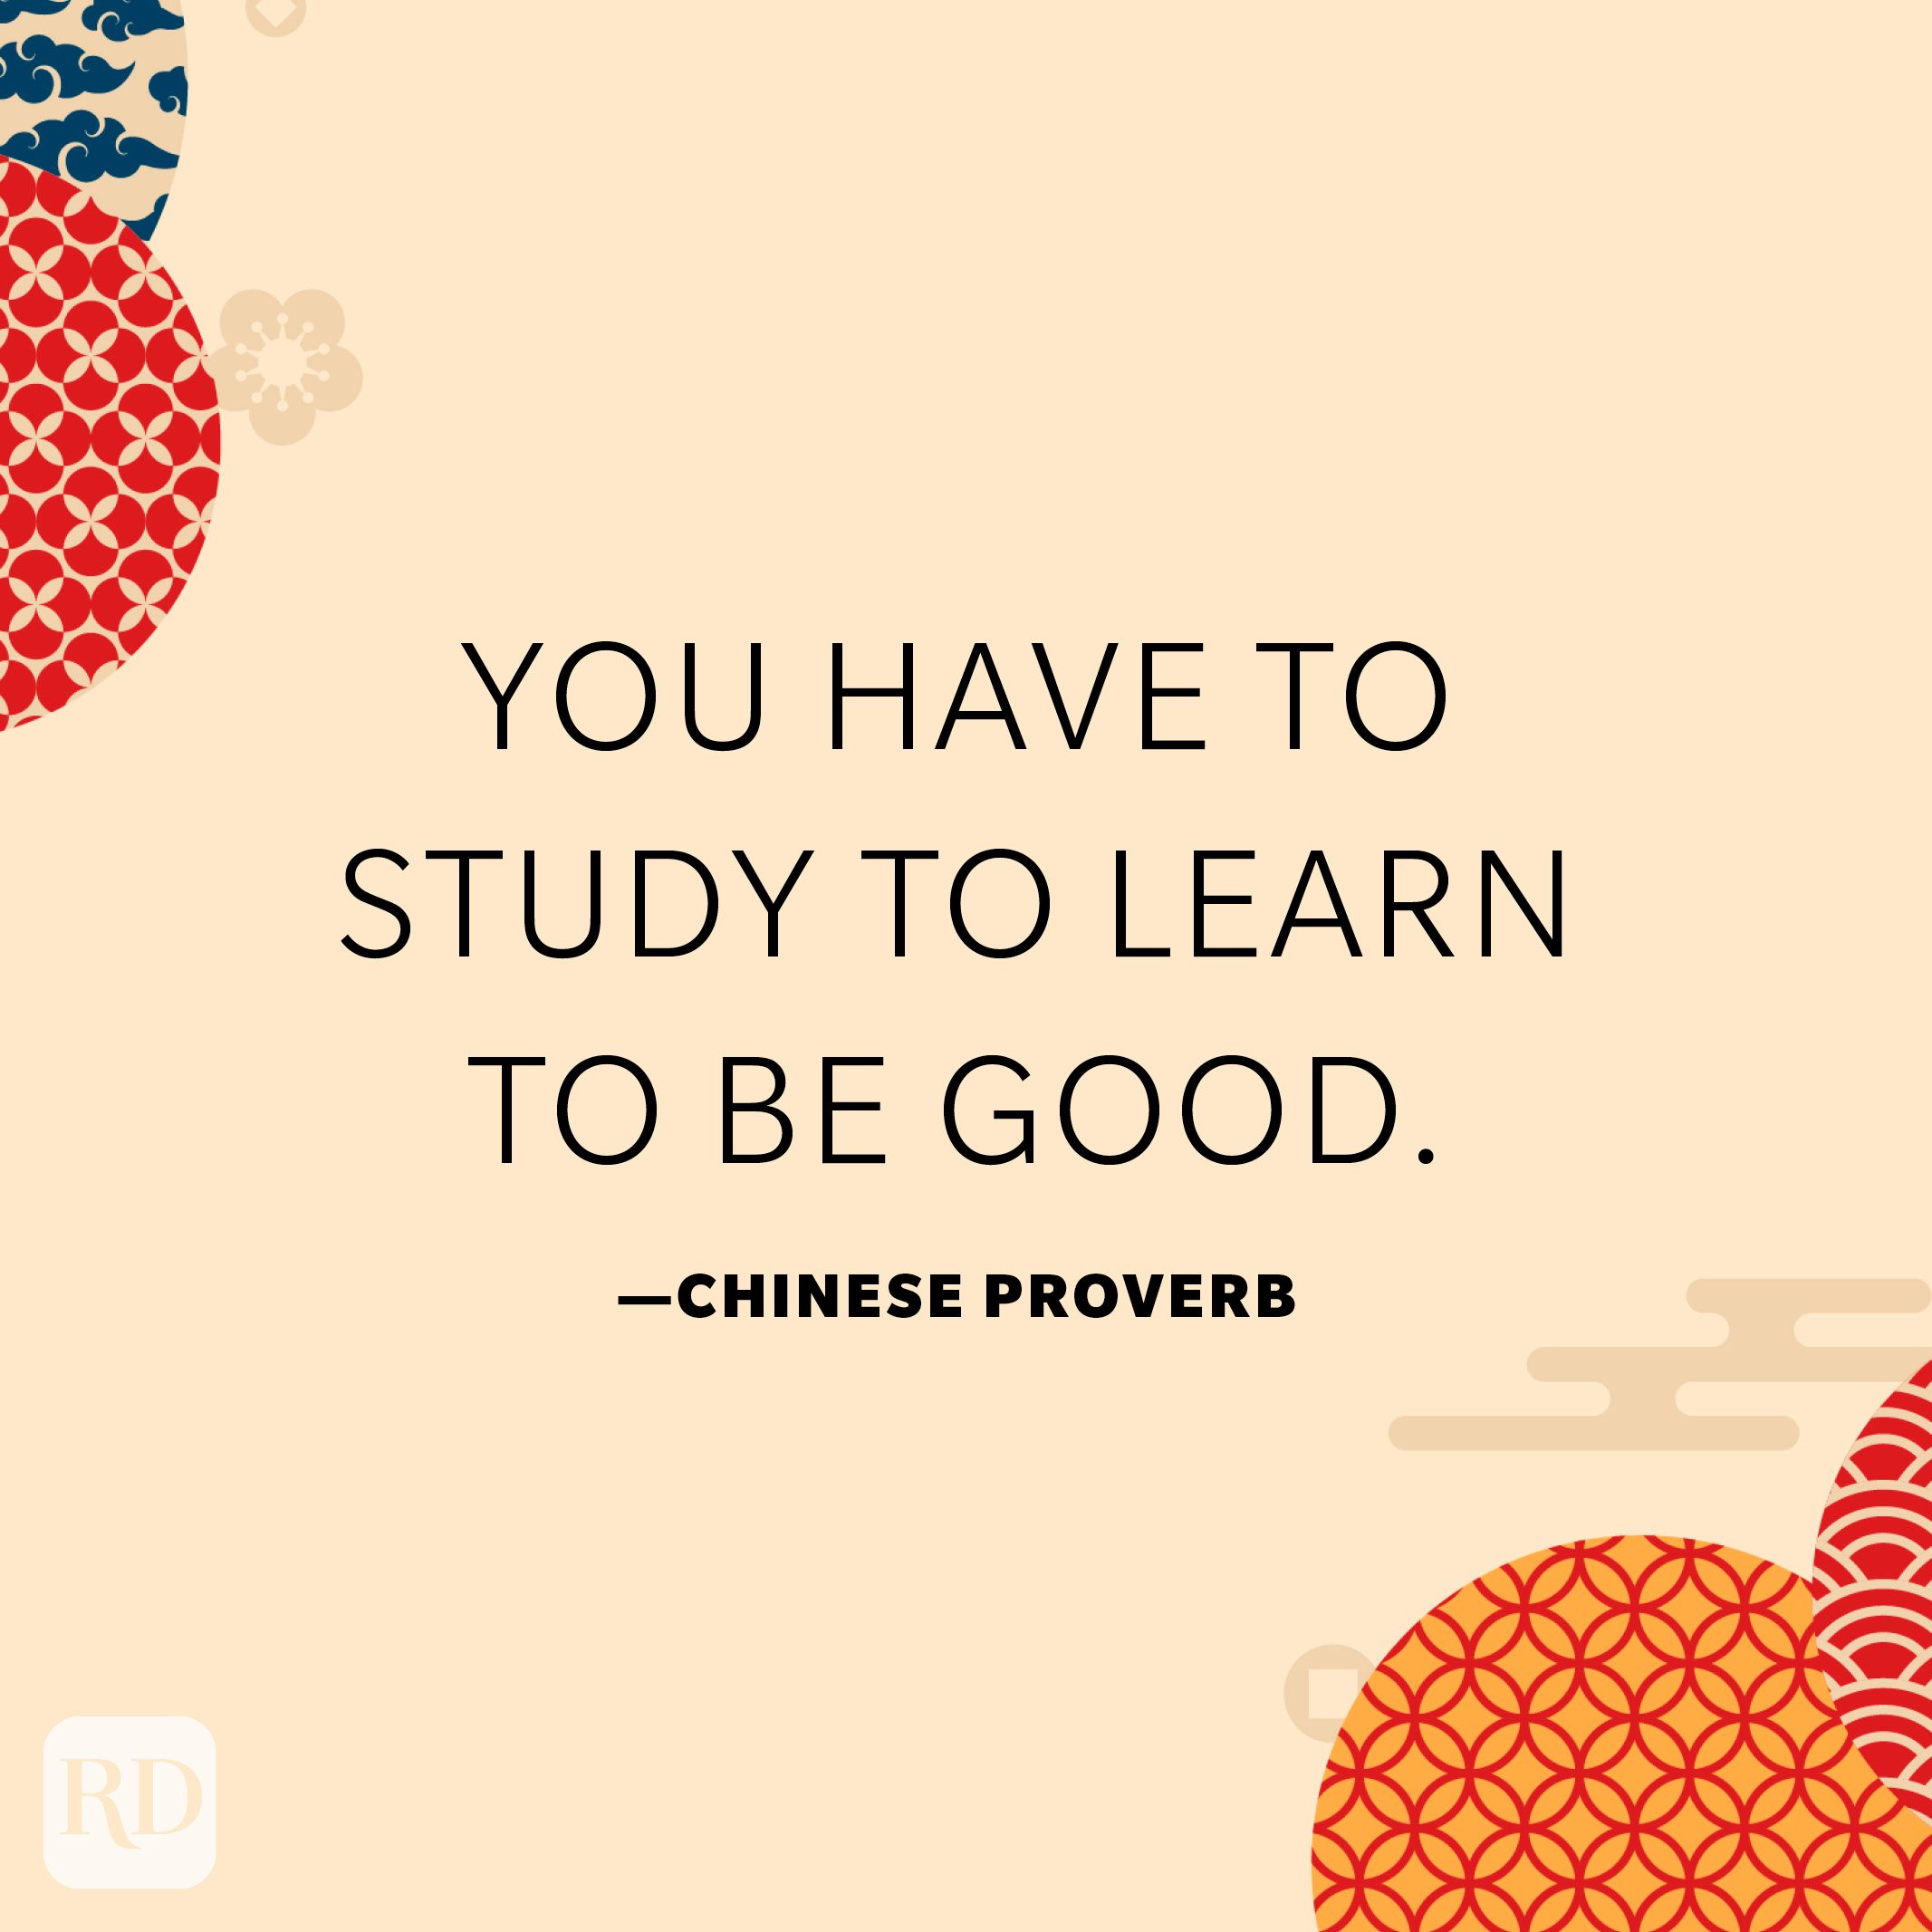 You have to study to learn to be good.